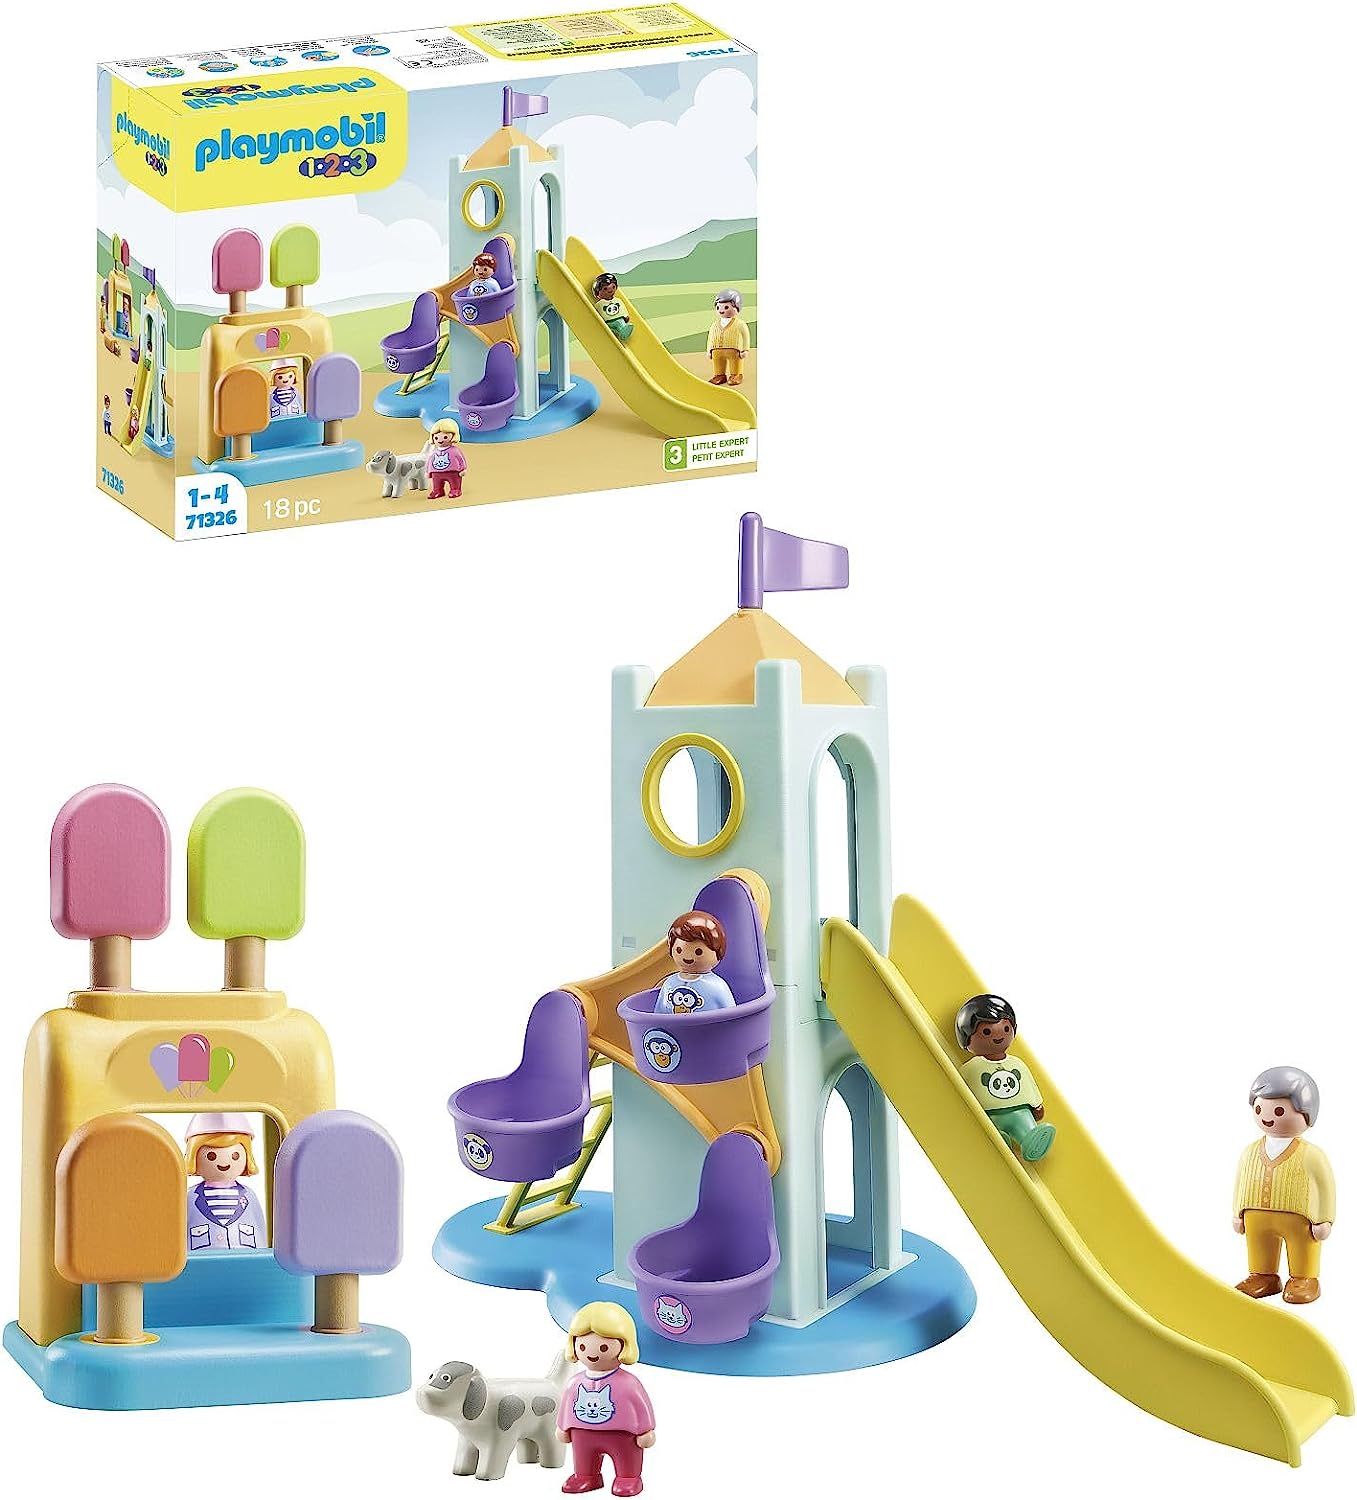 PLAYMOBIL 1.2.3: 71326 Adventure Tower with Ice Stand, Educational Toy for Toddlers, Toy for Children from 12 Months